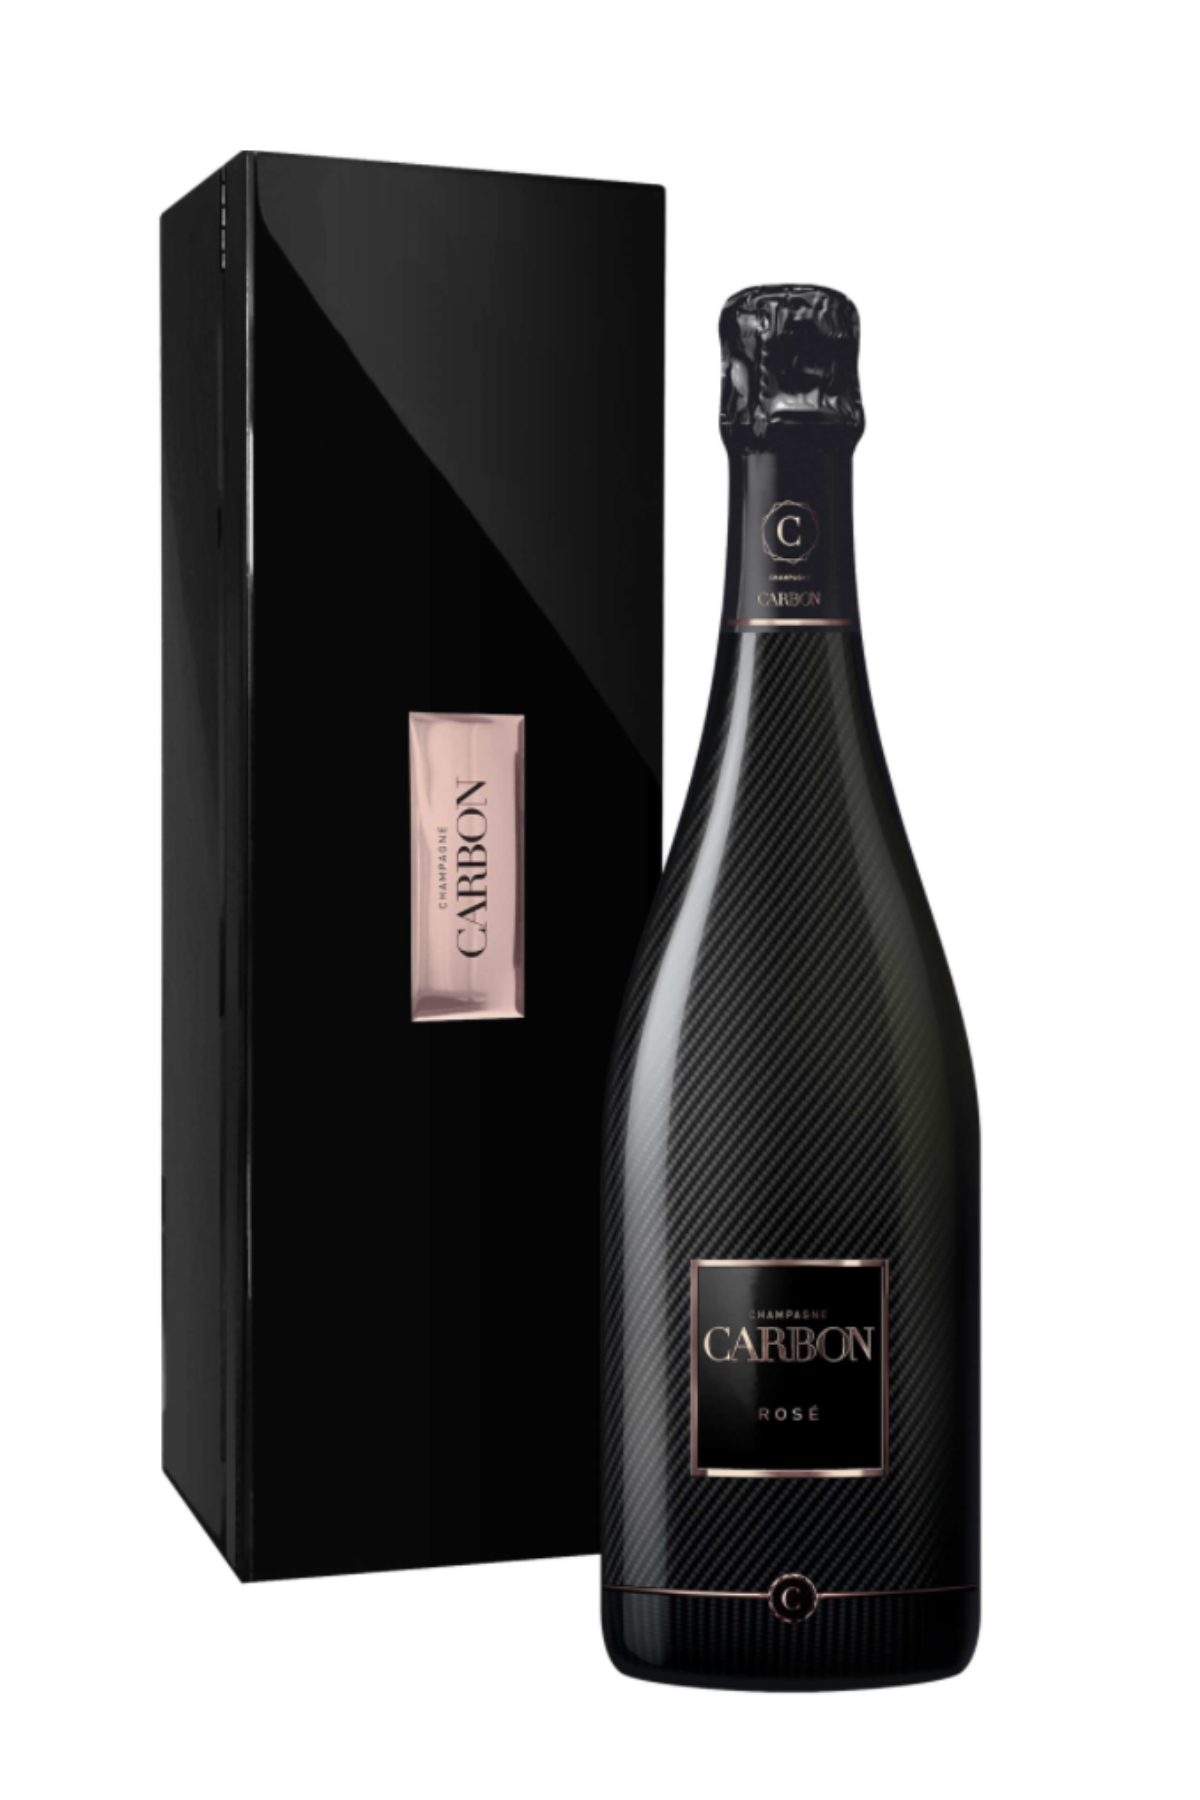 CHAUCT ROSSA CARON CHAMPAGNE